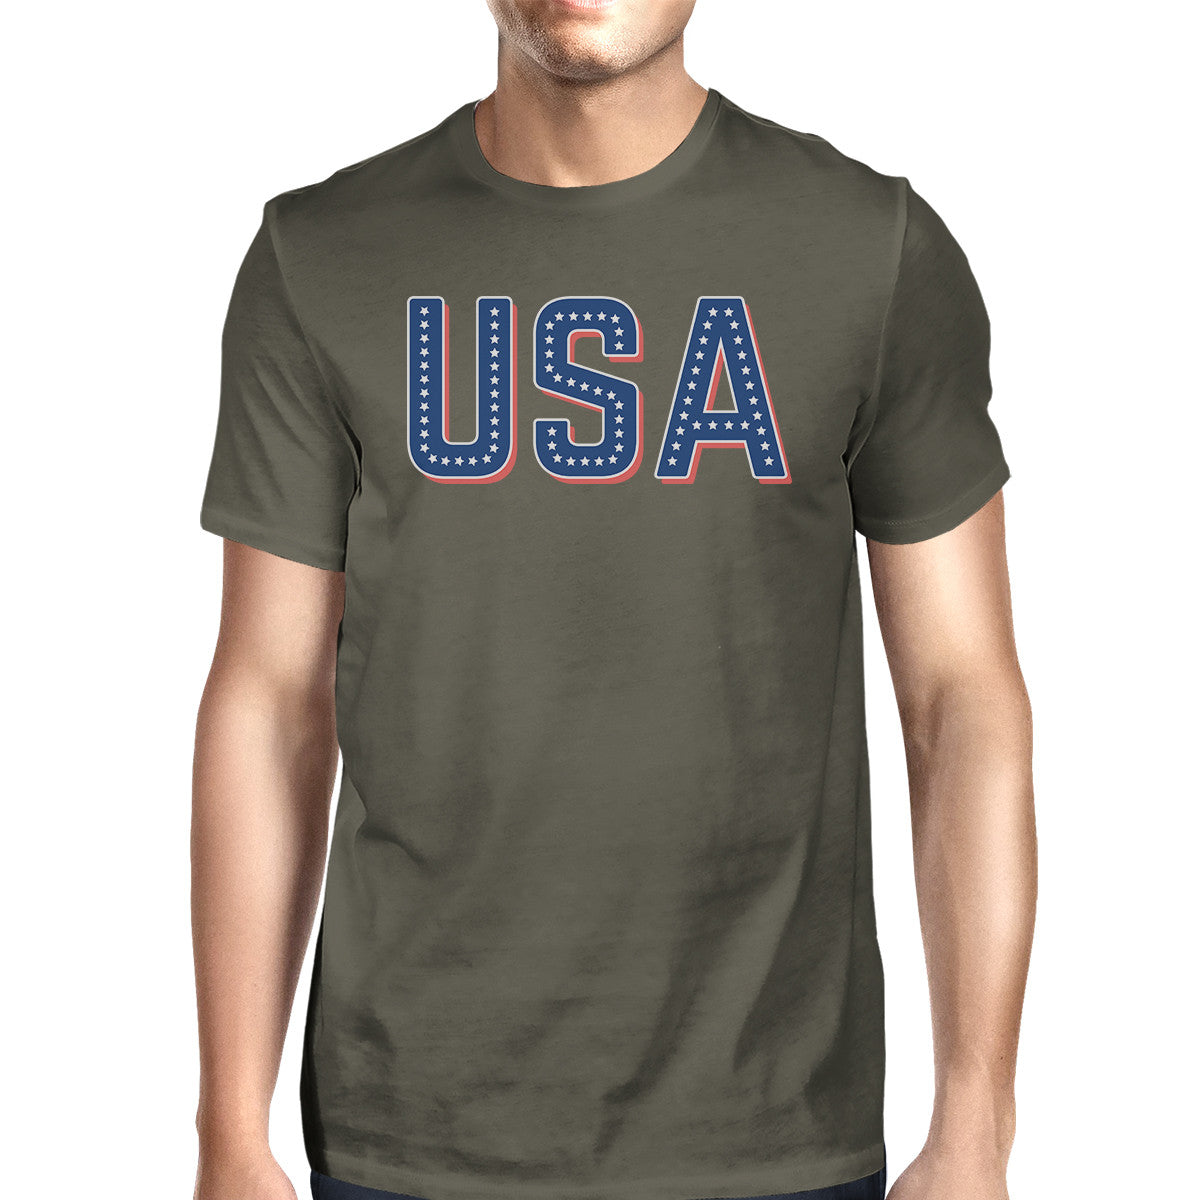 USA With Stars Mens Dark Grey Crewneck Graphic Tee For 4th Of Ju